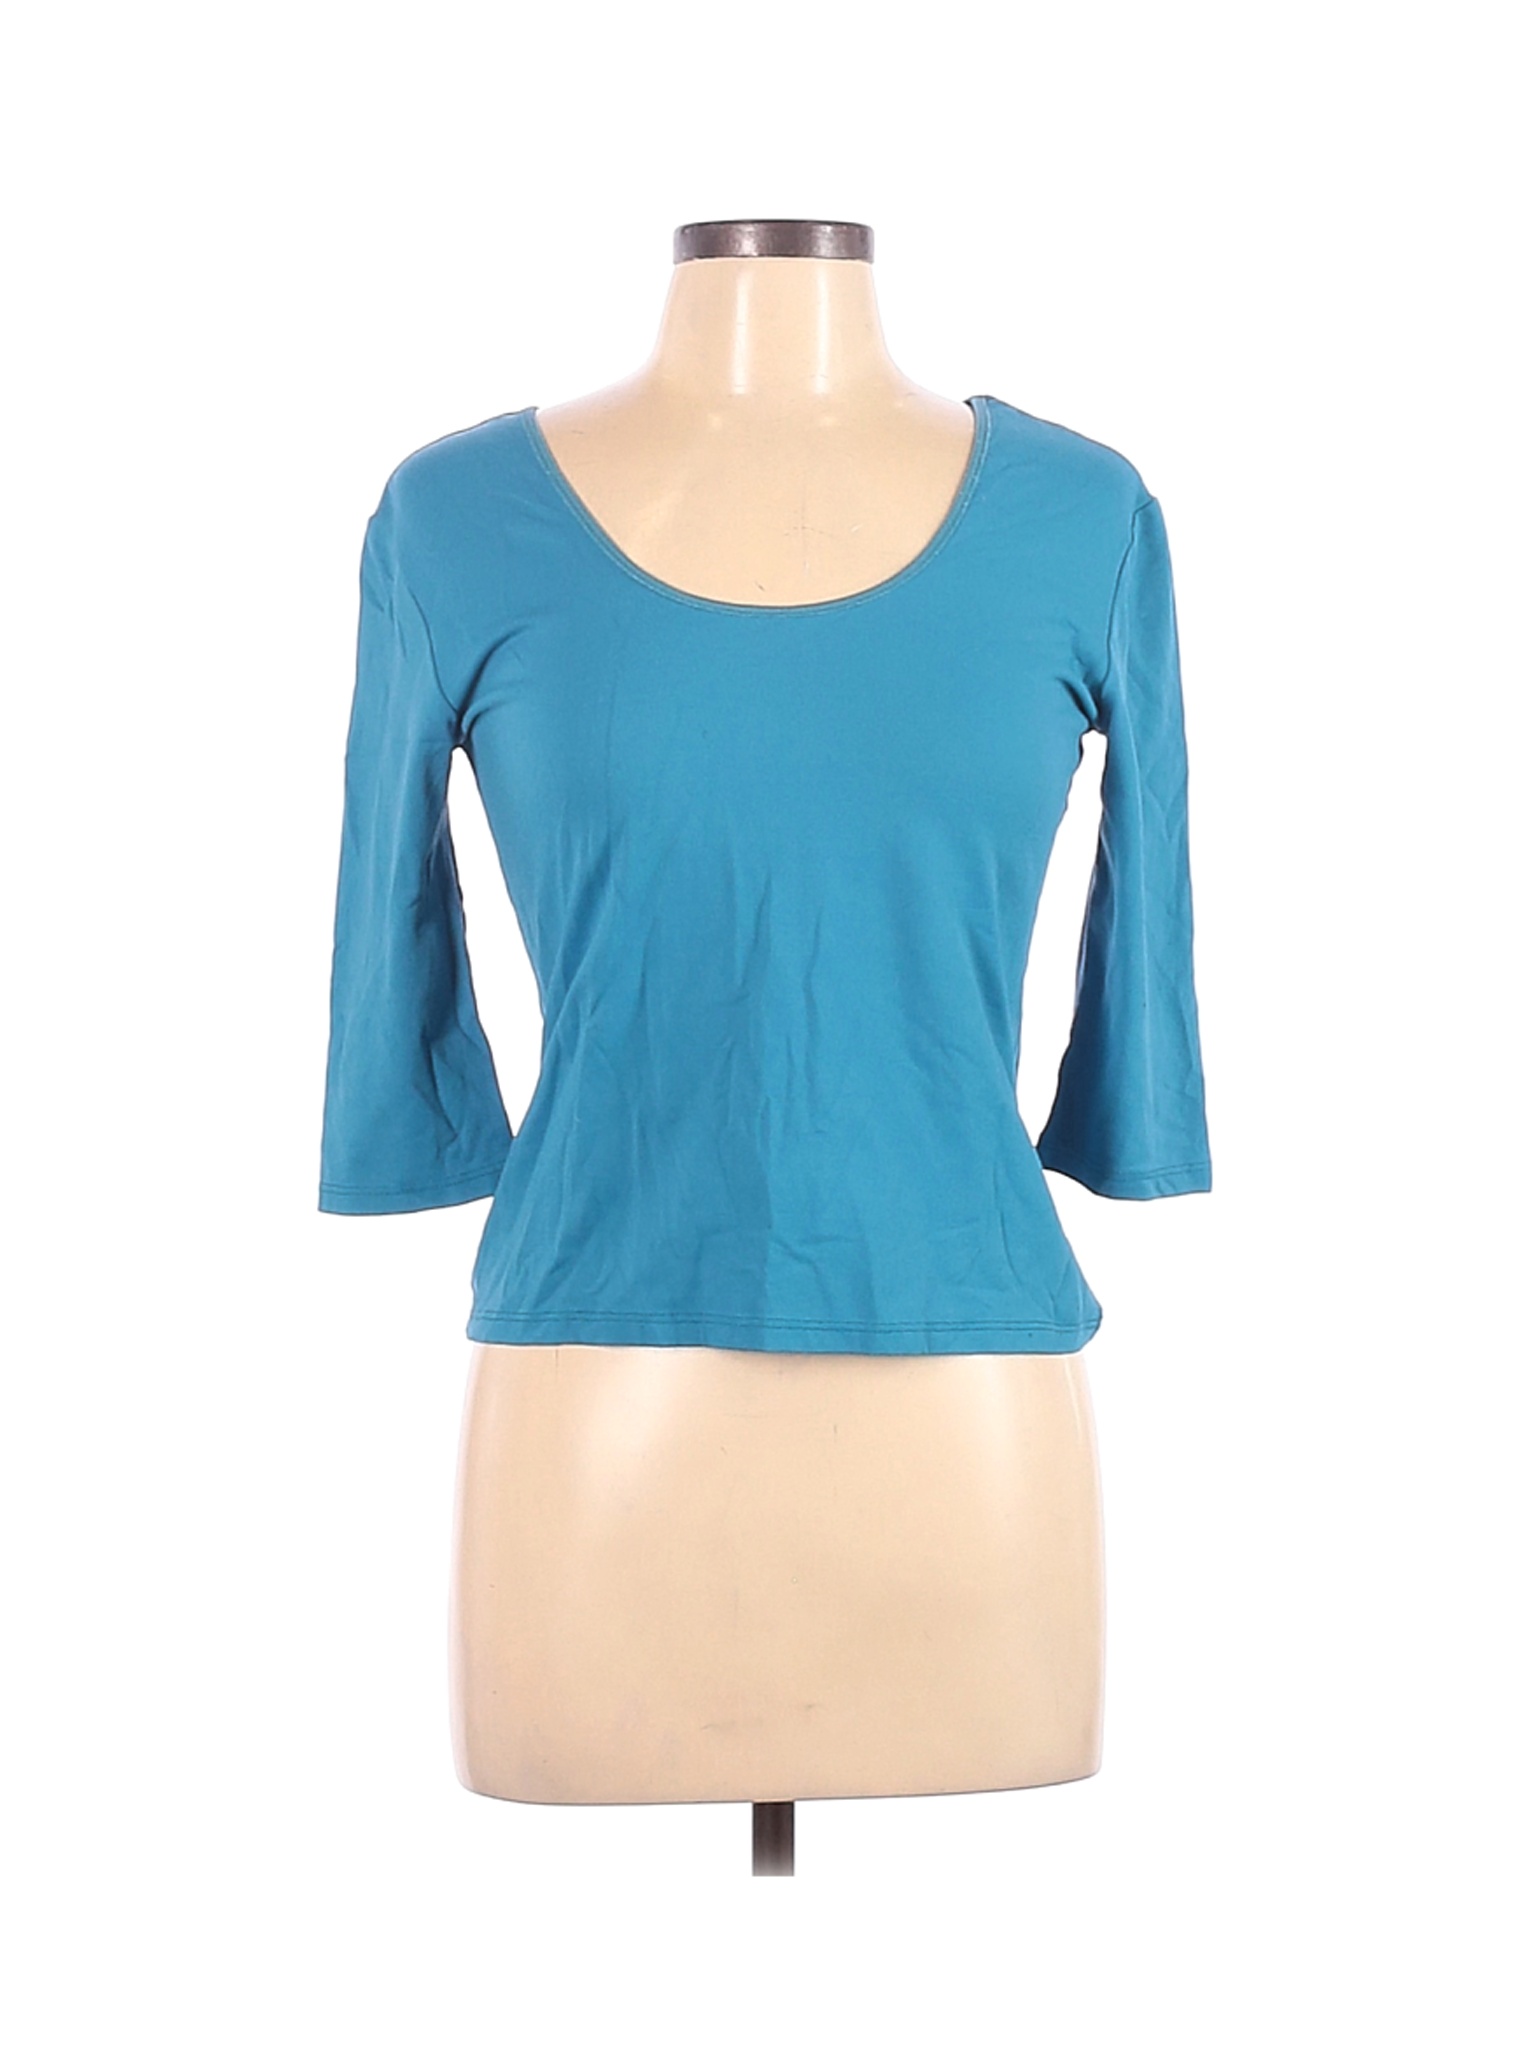 The Limited Women Blue 3/4 Sleeve Top L | eBay